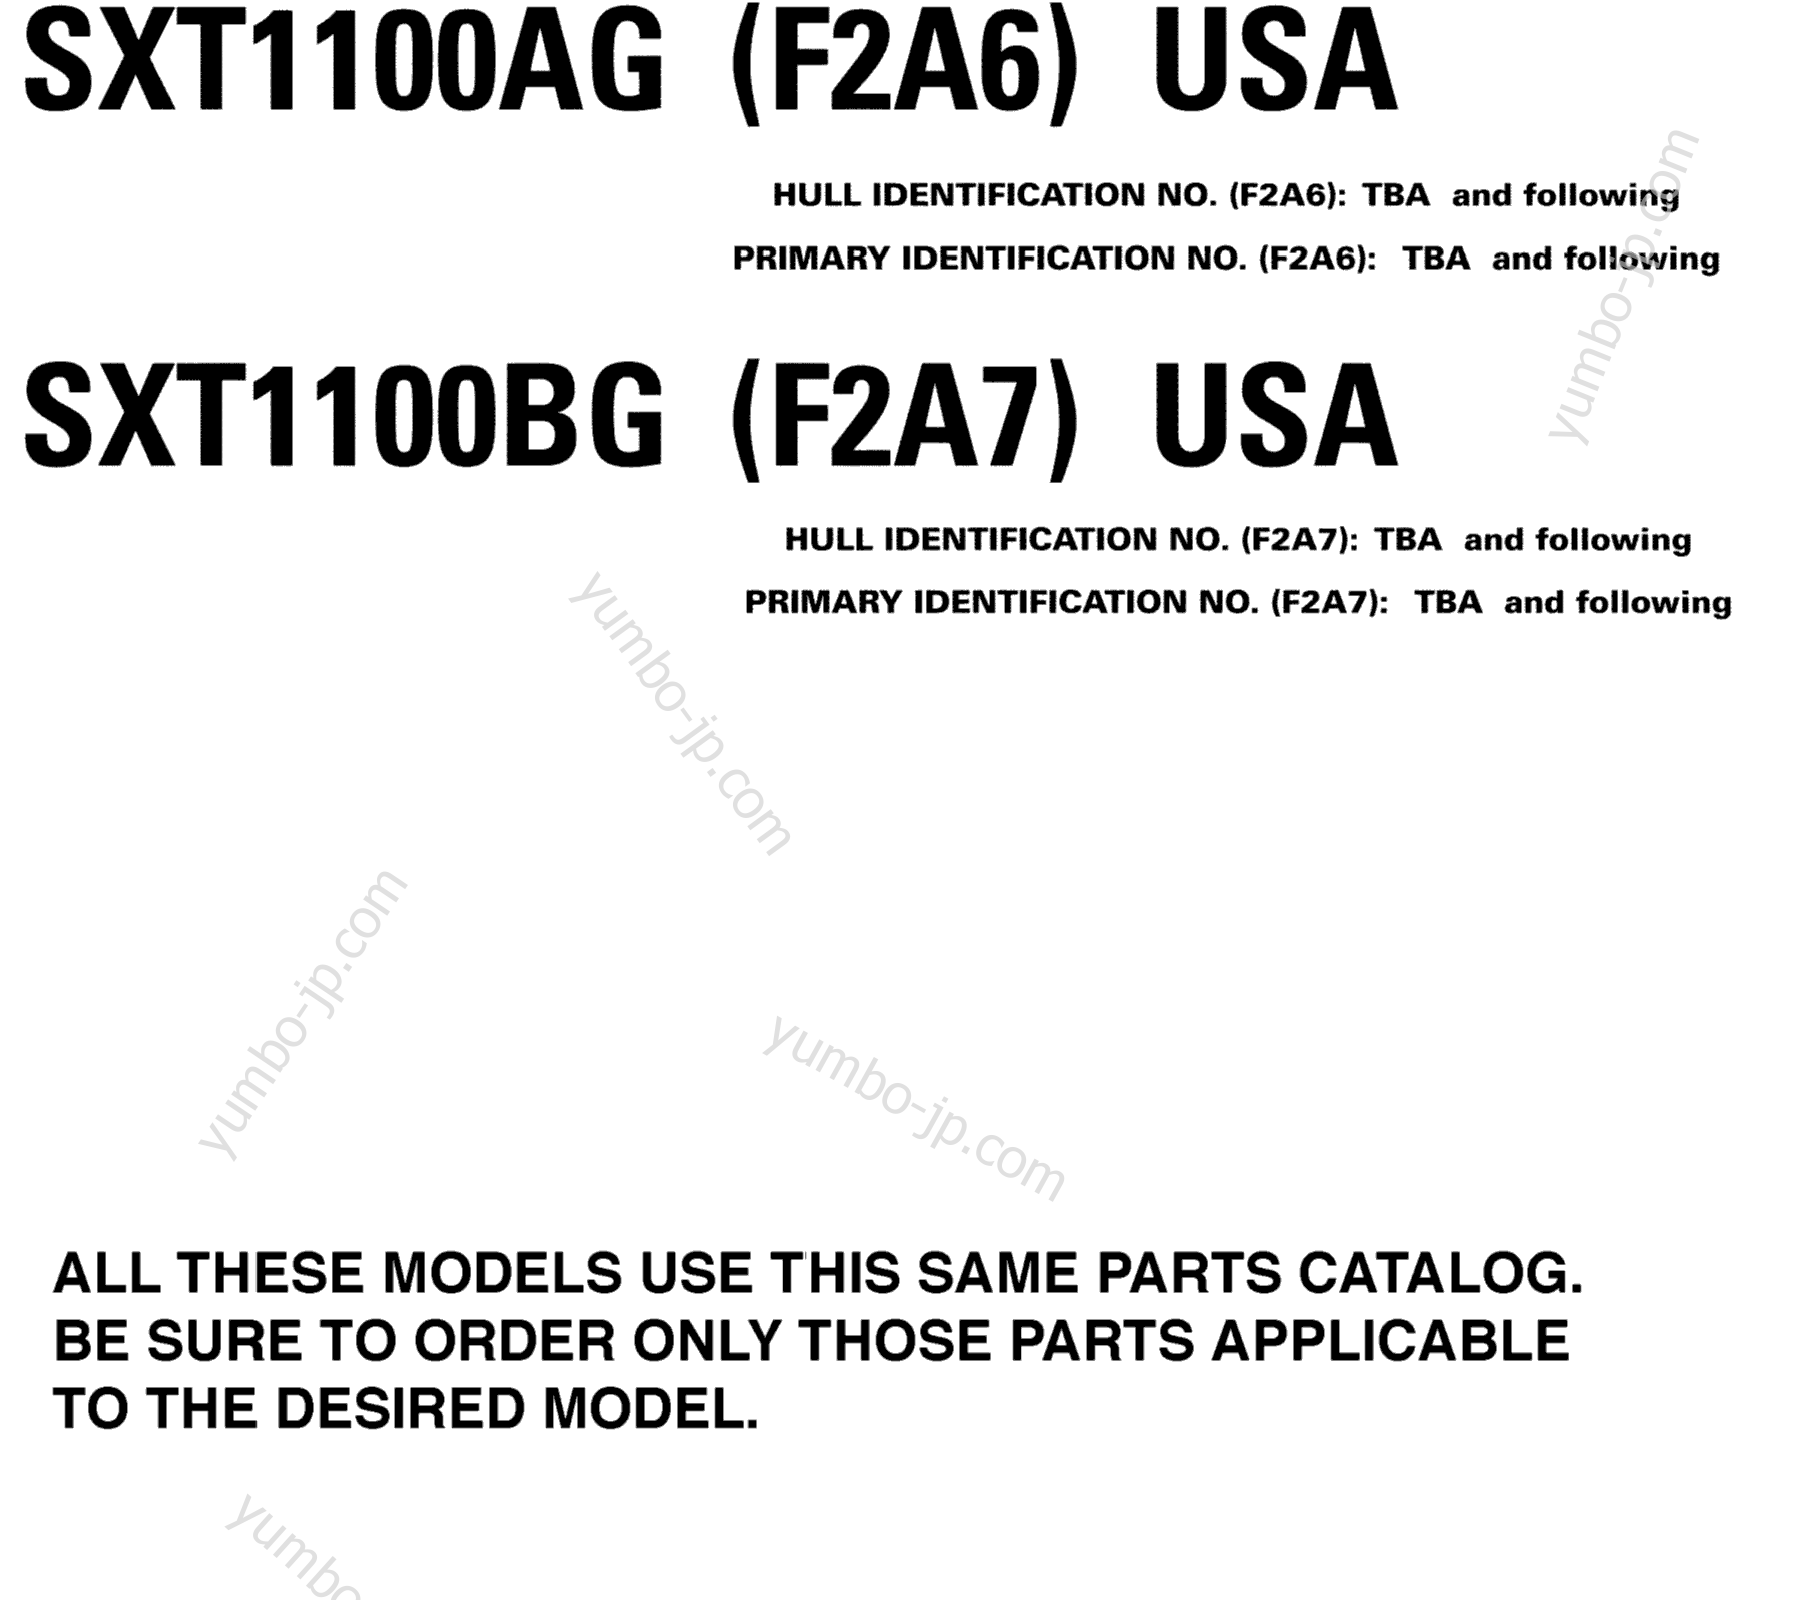 Models In This Catalog for boats YAMAHA AR230 HIGH OUTPUT (SXT1100AG) 2008 year